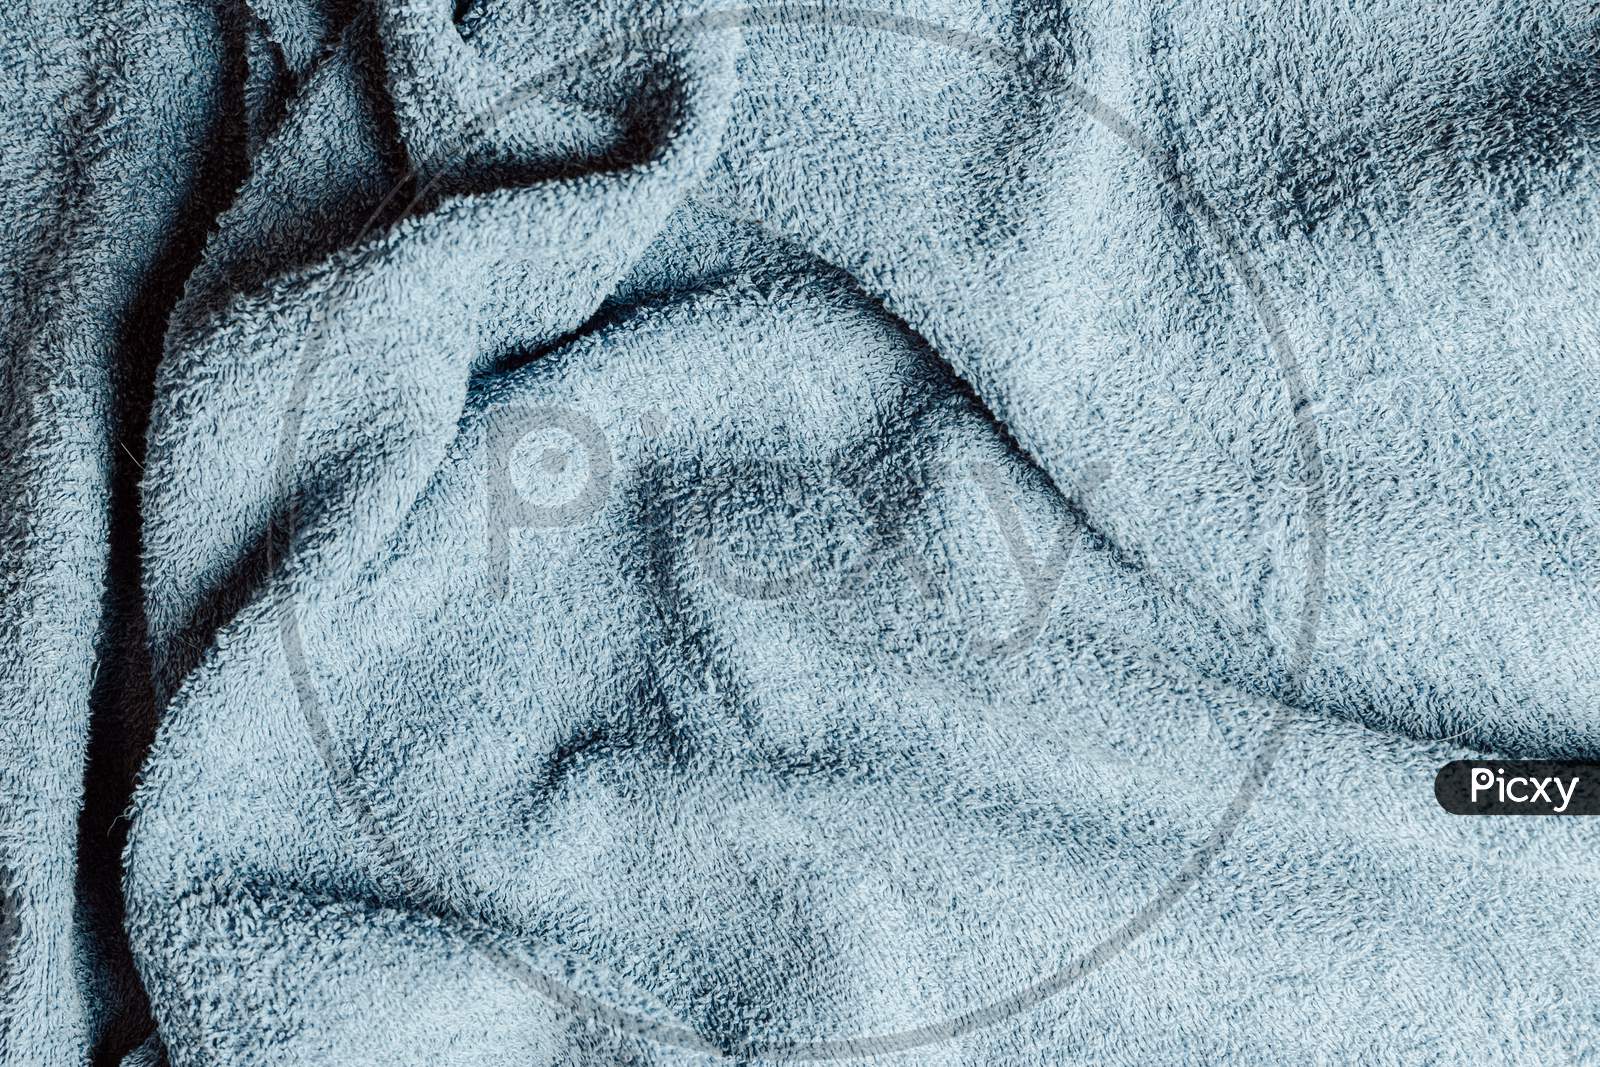 Top View From The Top Of A Light Blue Towel With Some Hard Wrinkles